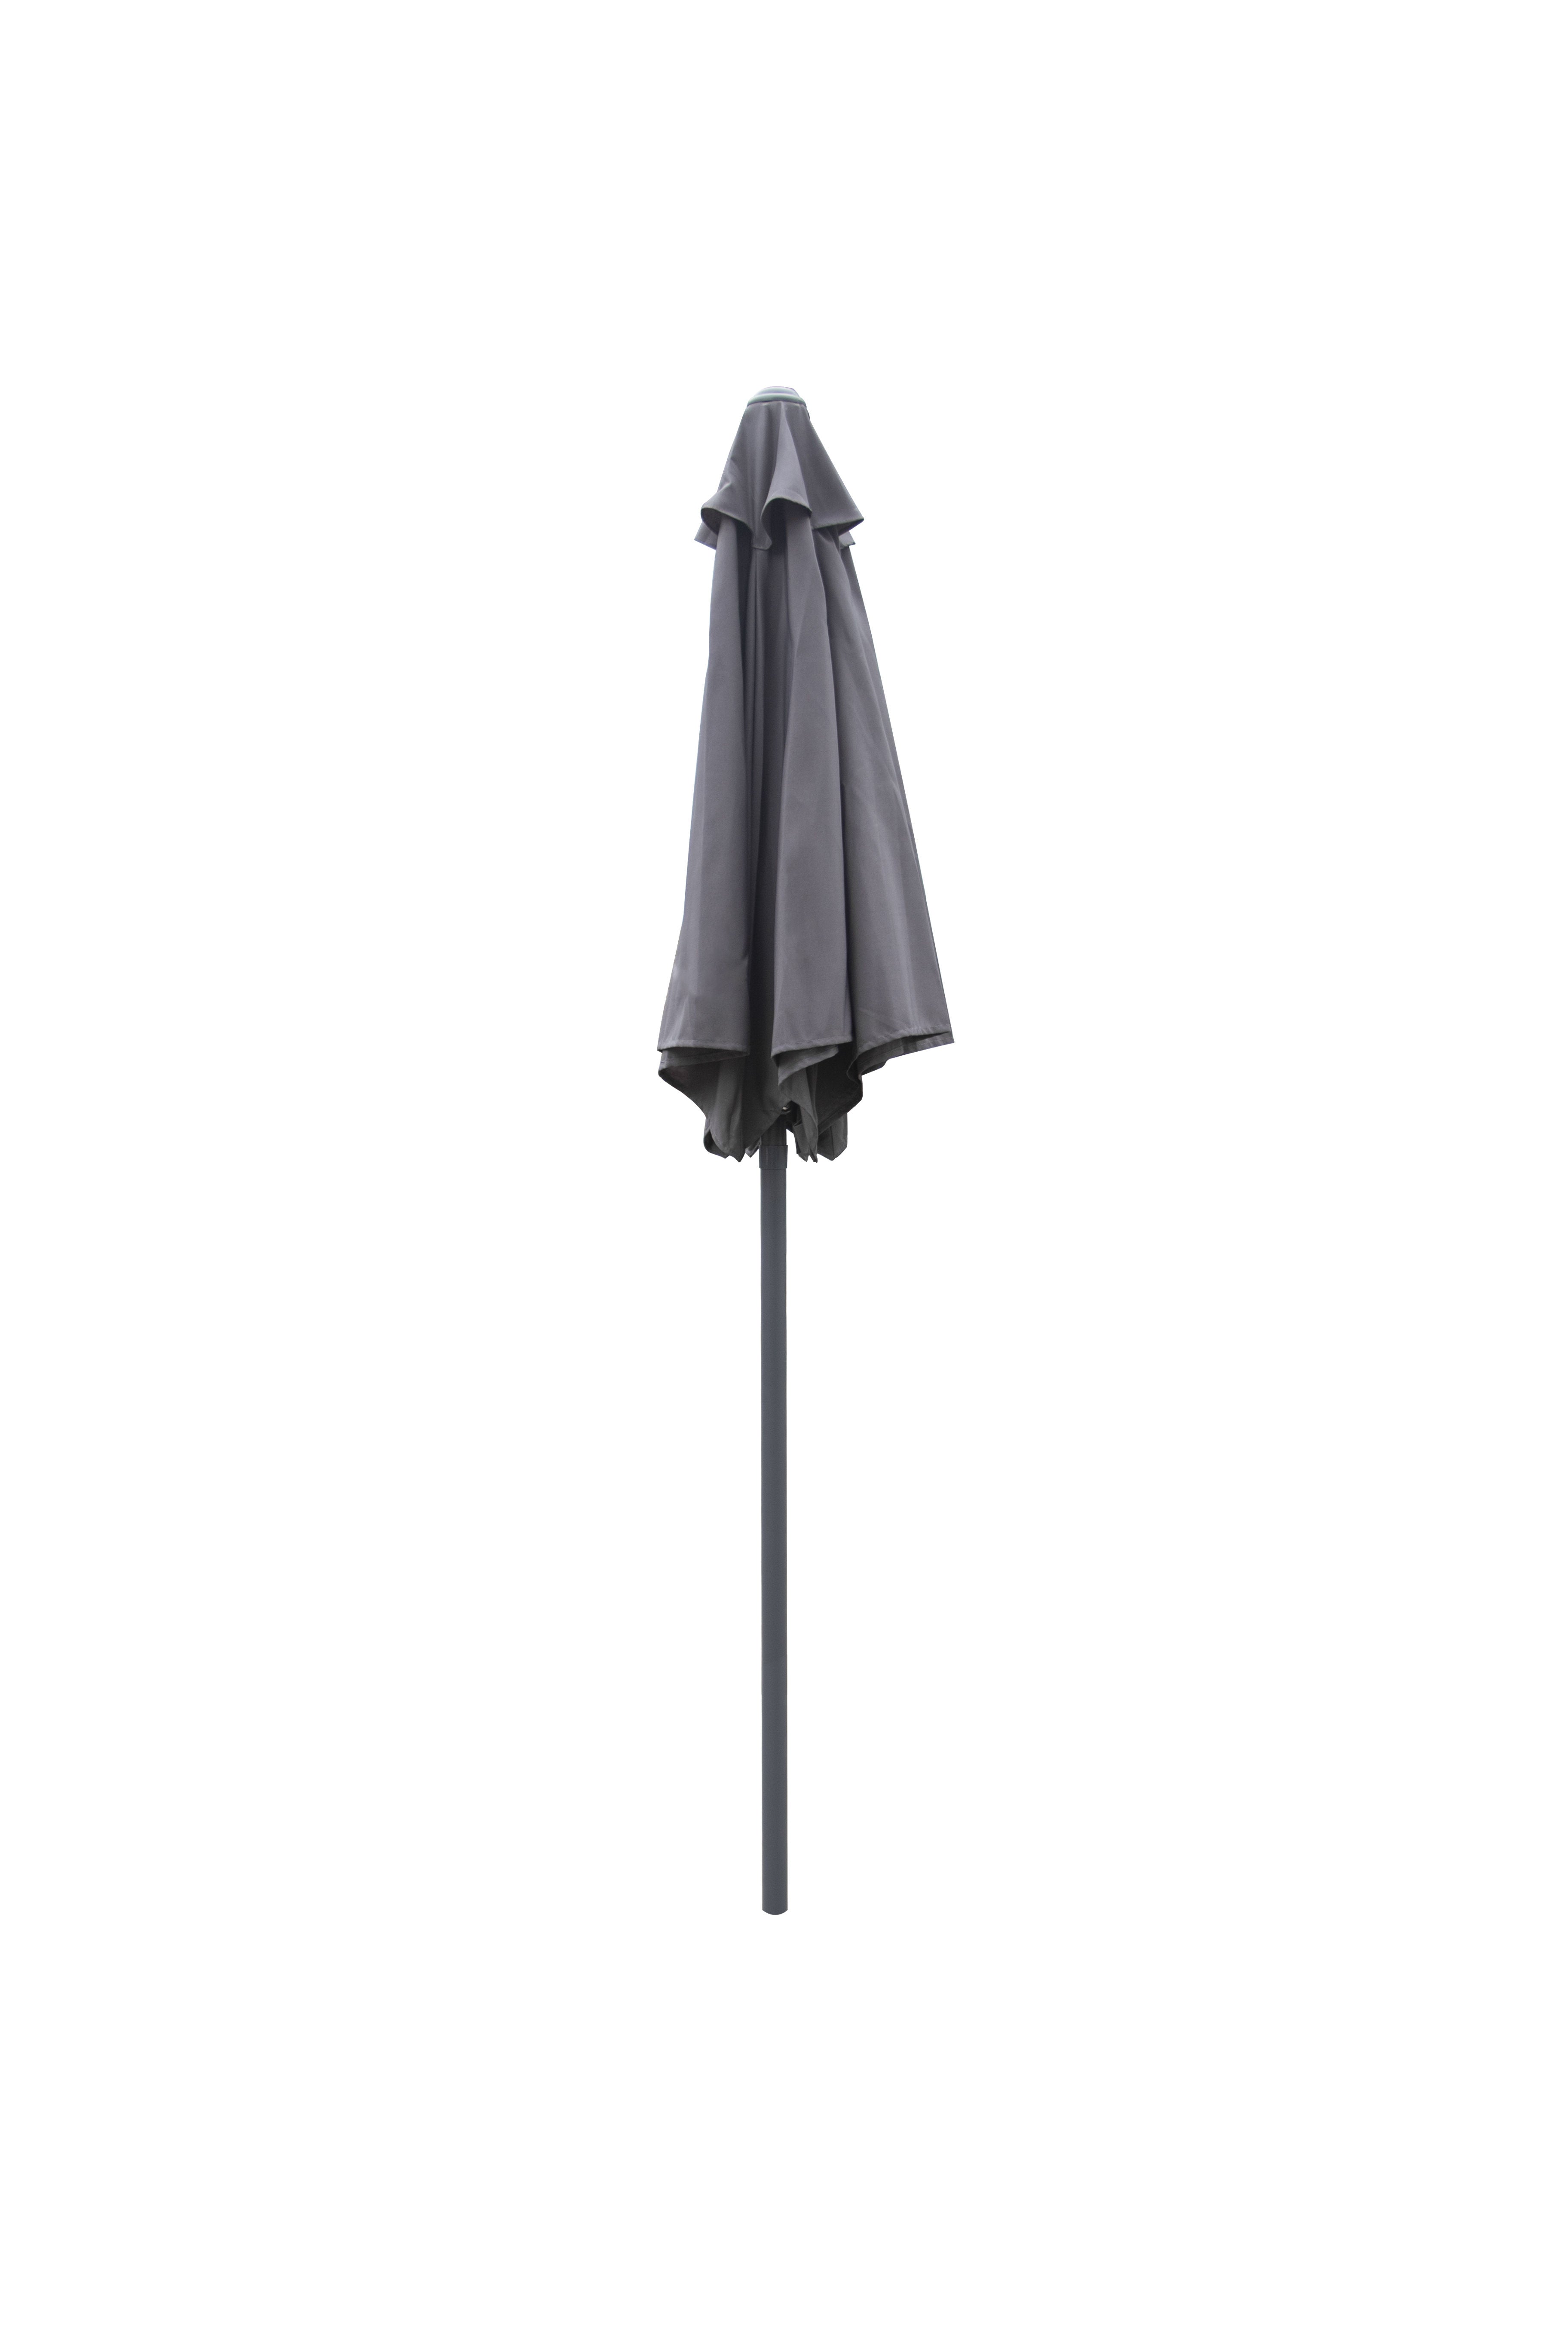 7' Tilting market umbrella, w/out base, cover included BLACK